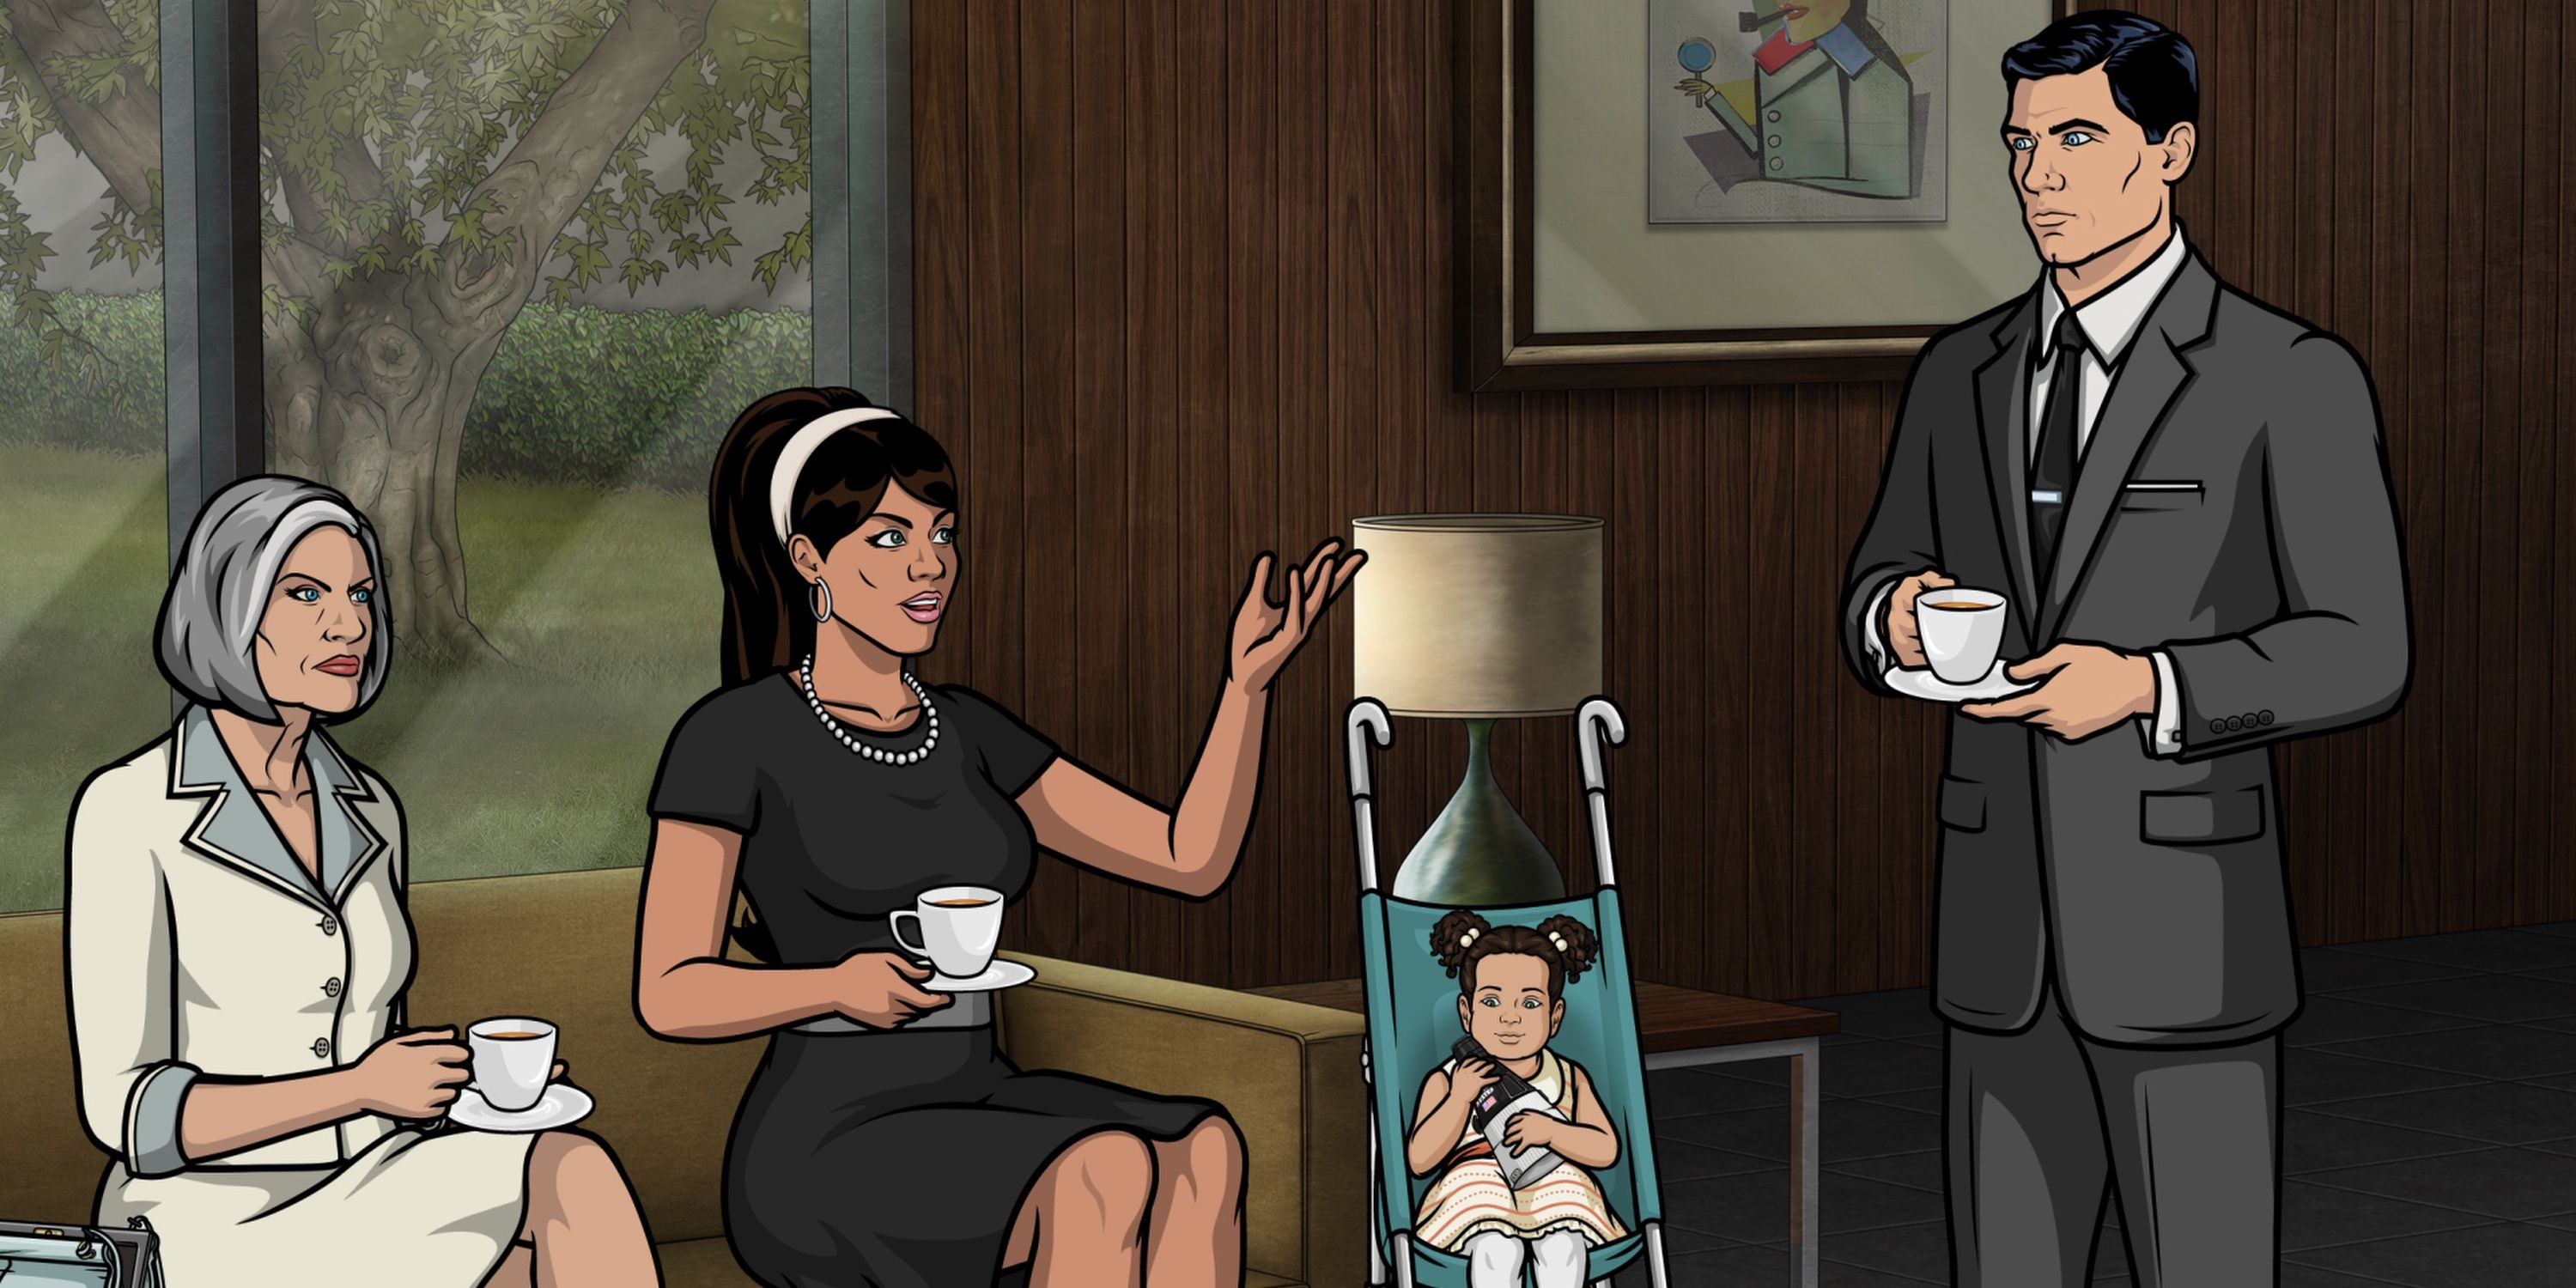 Malory Archer With Sterling, AJ and Lana